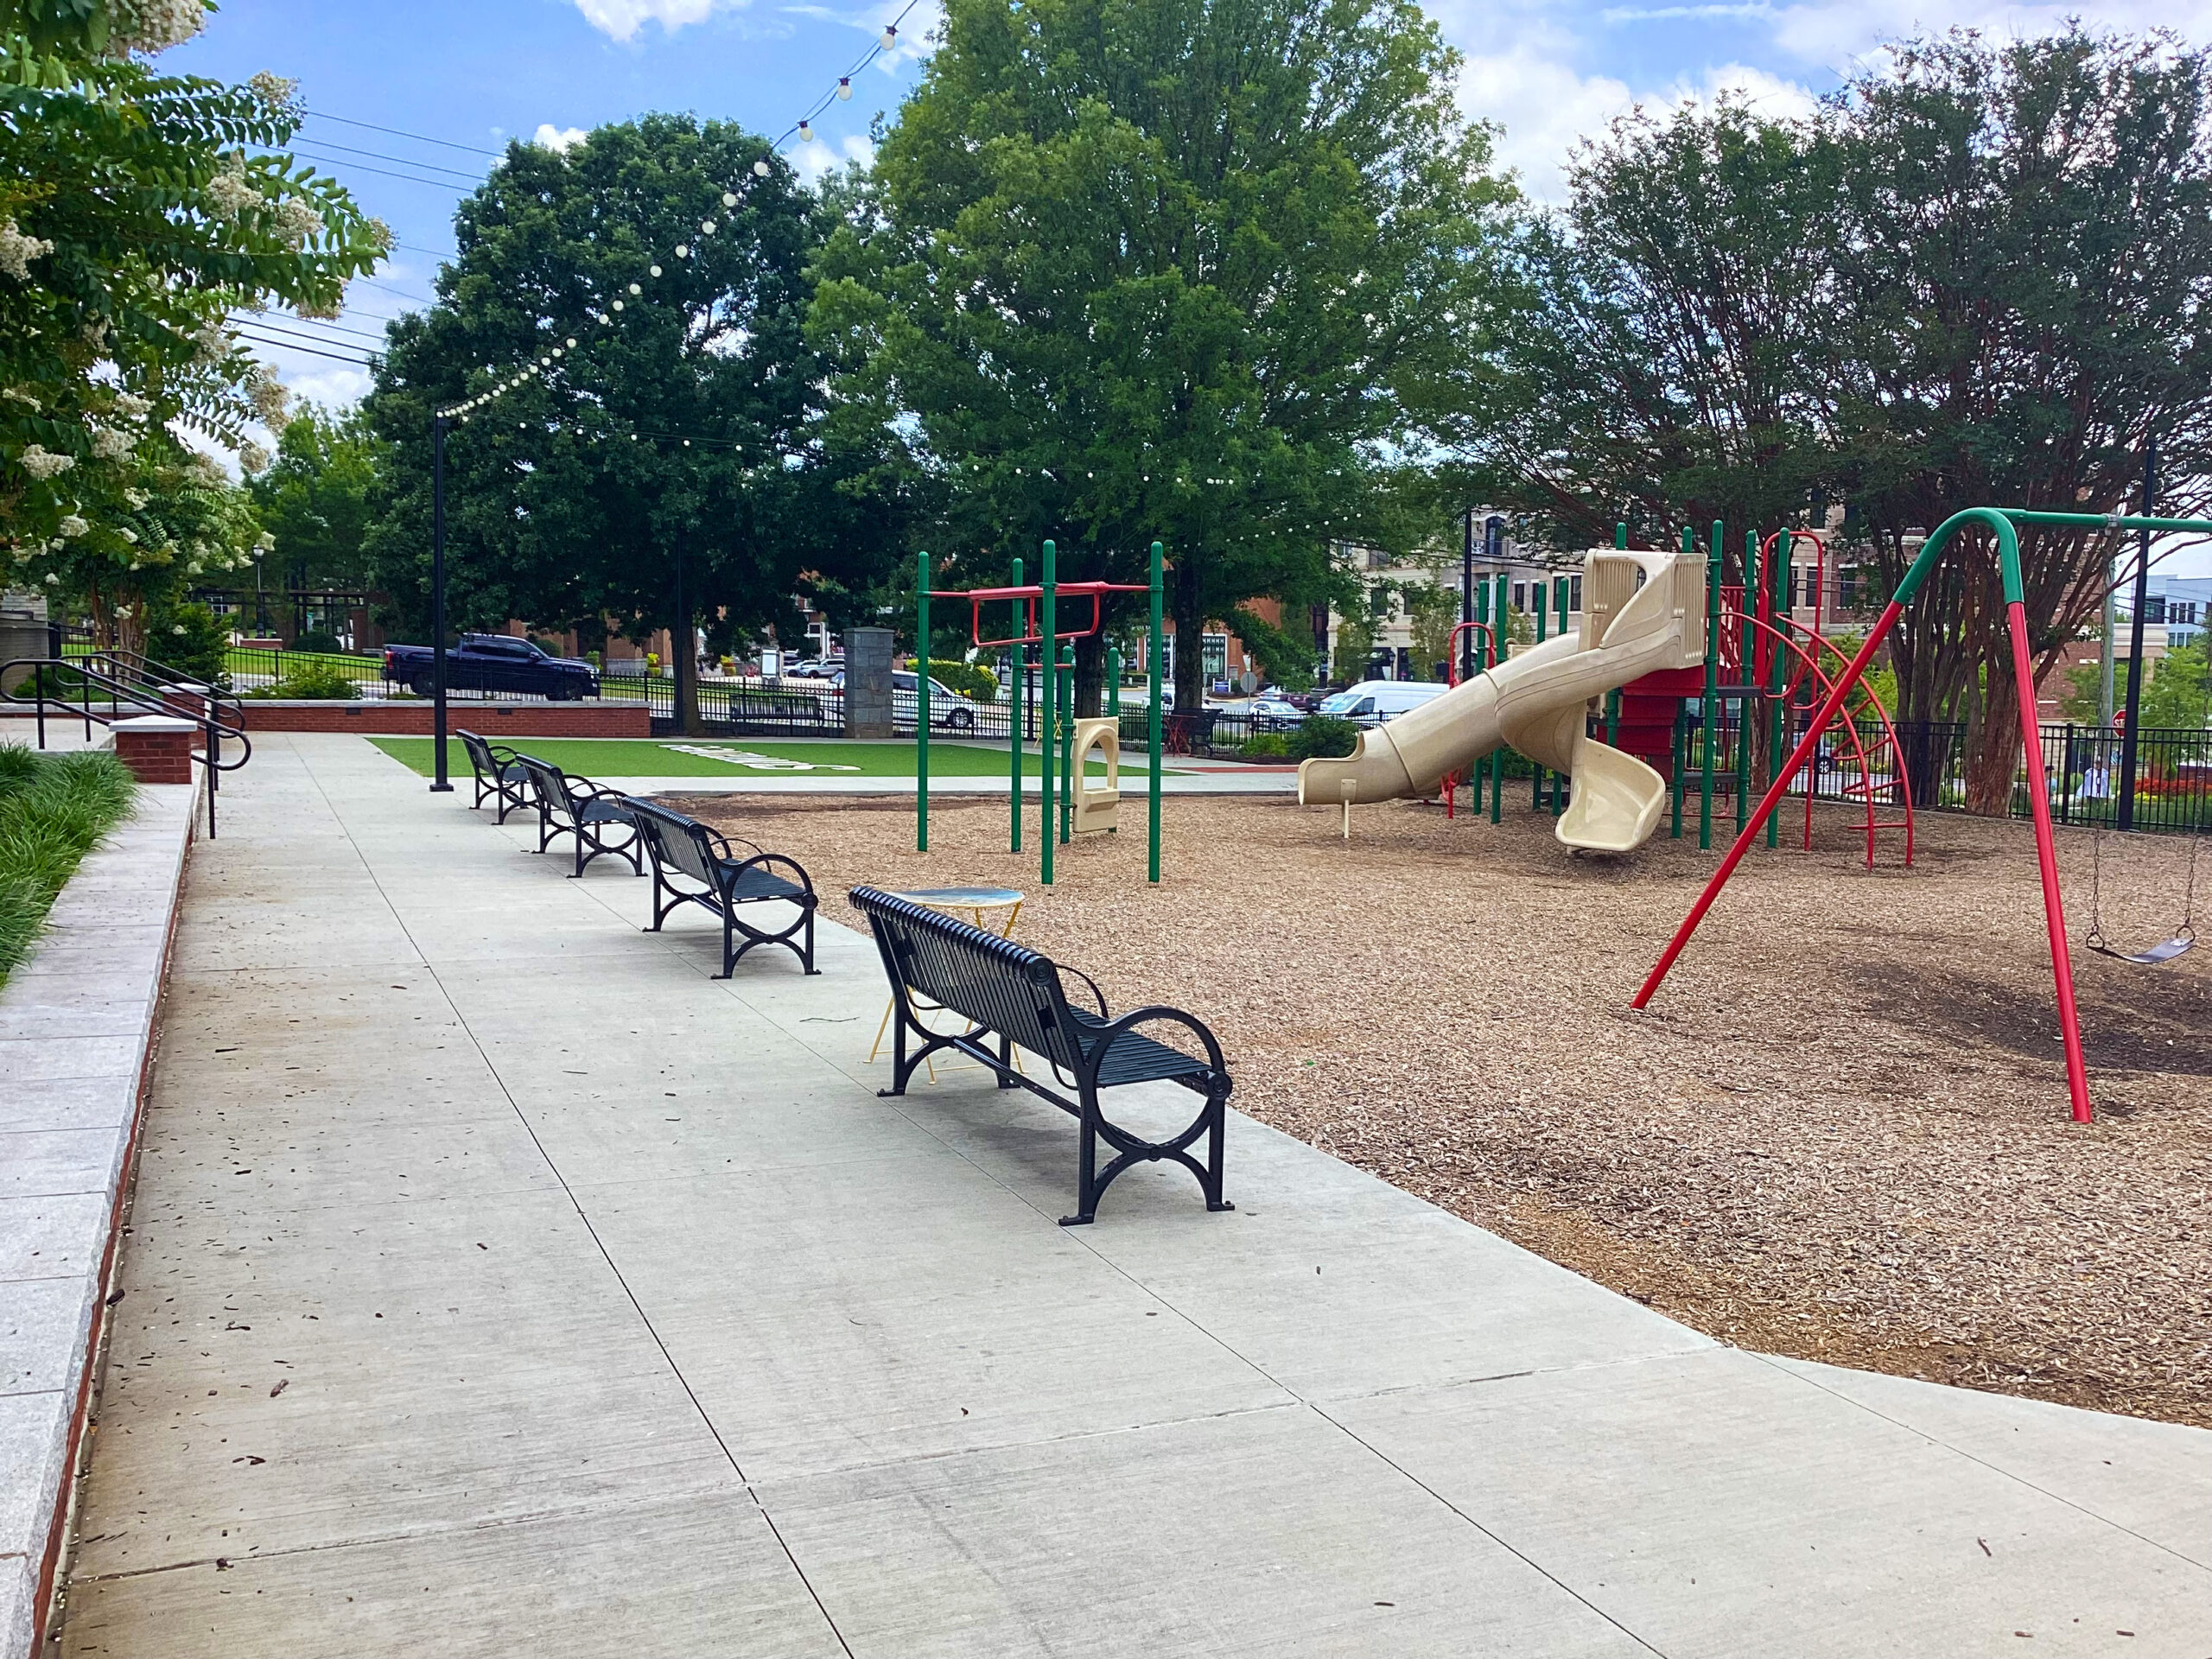 A playground with a sidewalk around it and benches on the sidewalk at the Suwanee Station Park